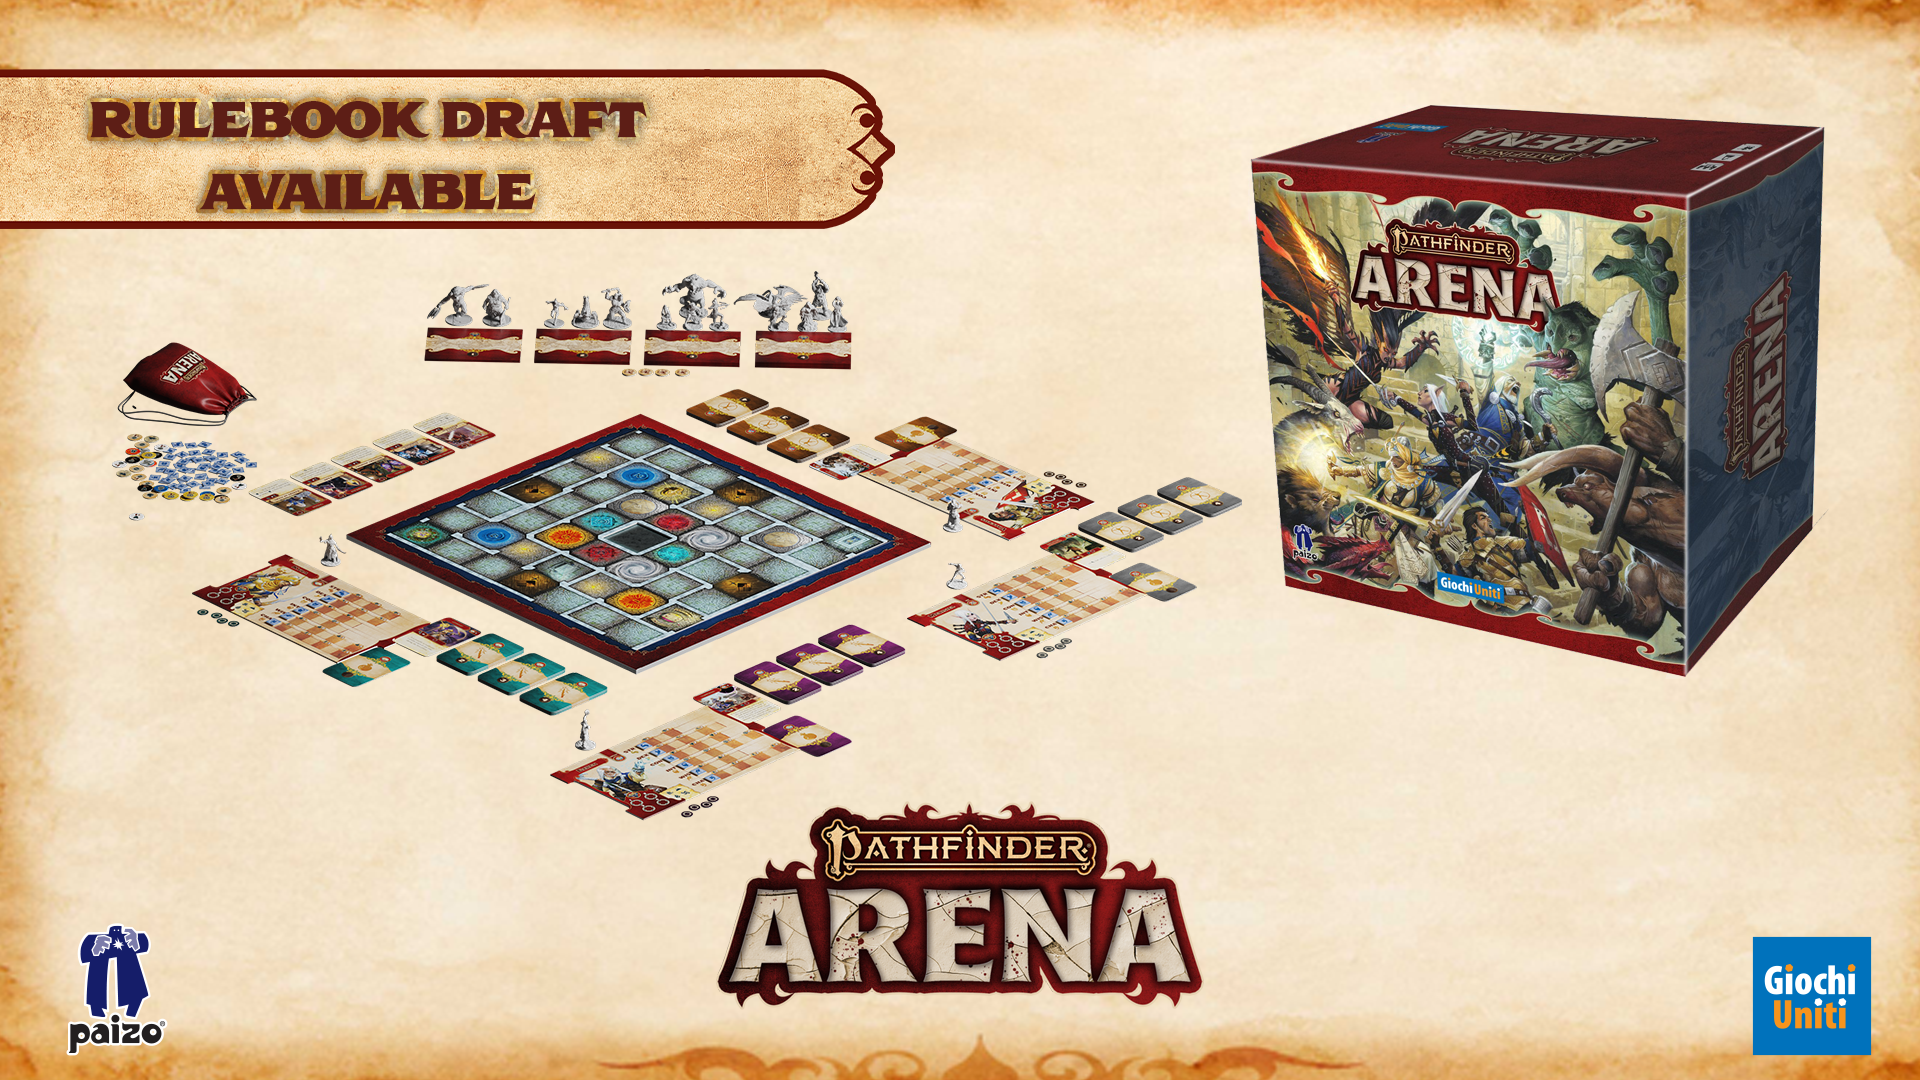 A mock of of the Pathfinder Arena box as well as the game board and cards laid out